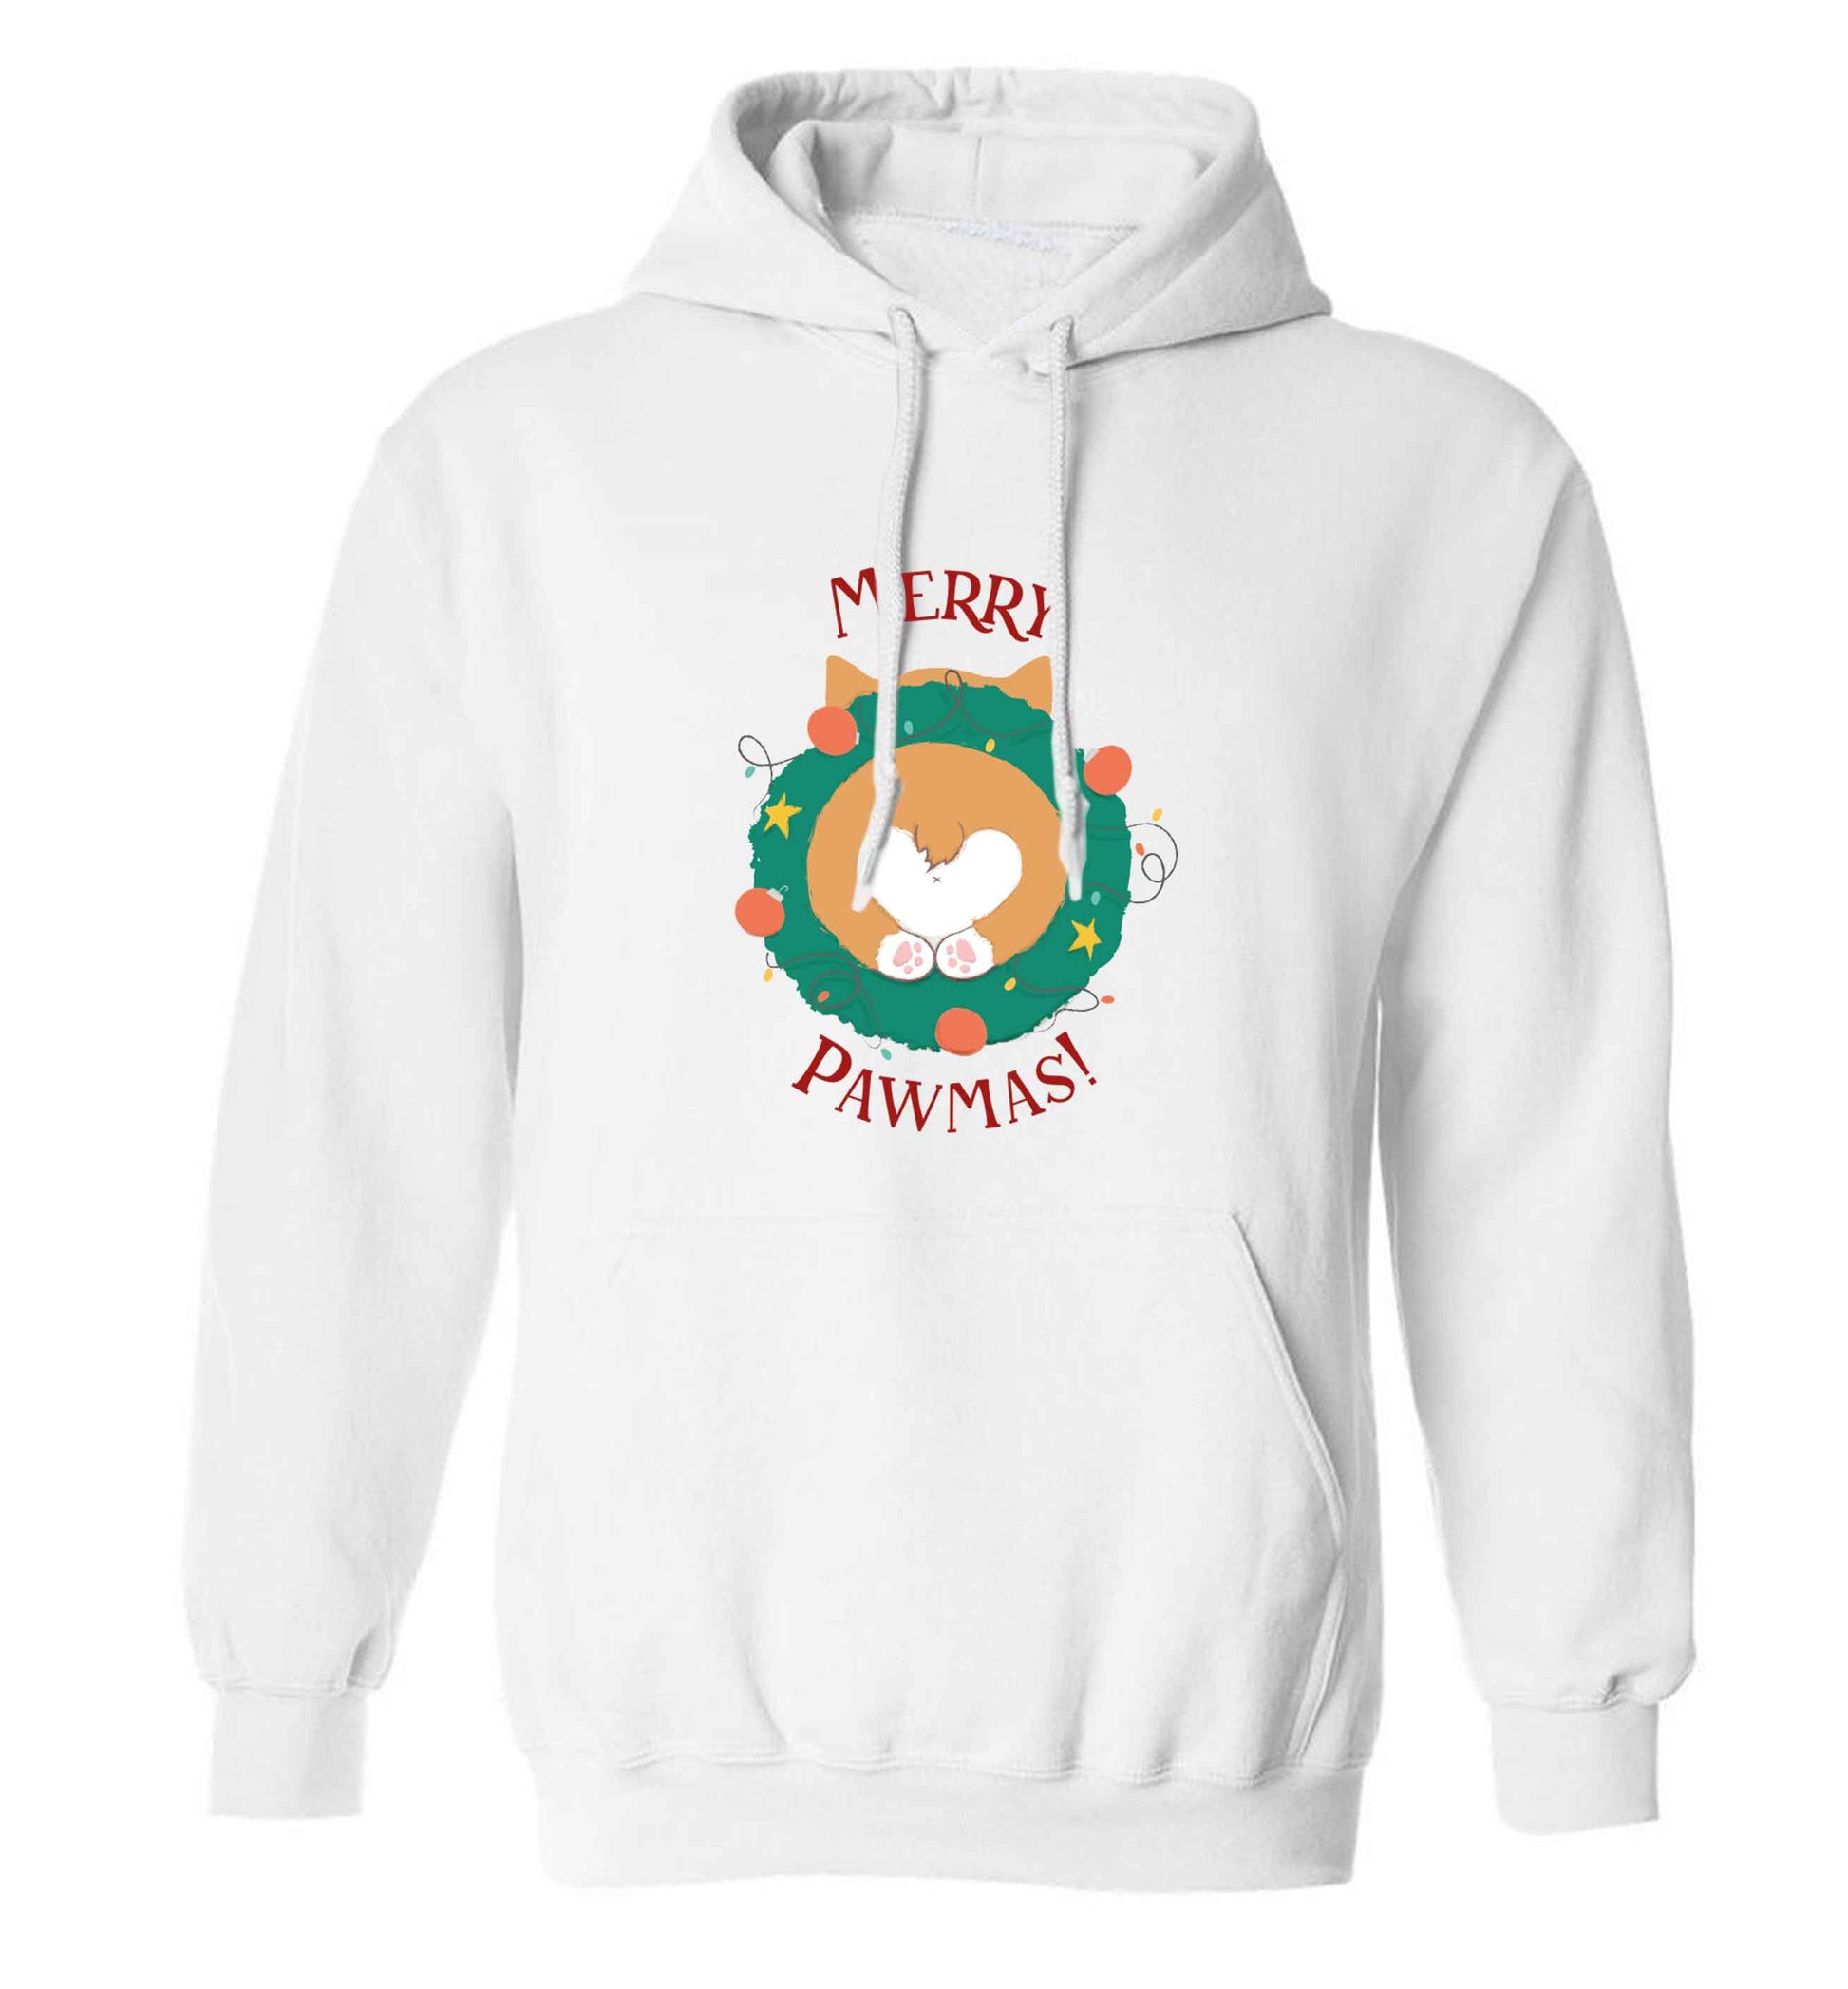 Merry Pawmas adults unisex white hoodie 2XL